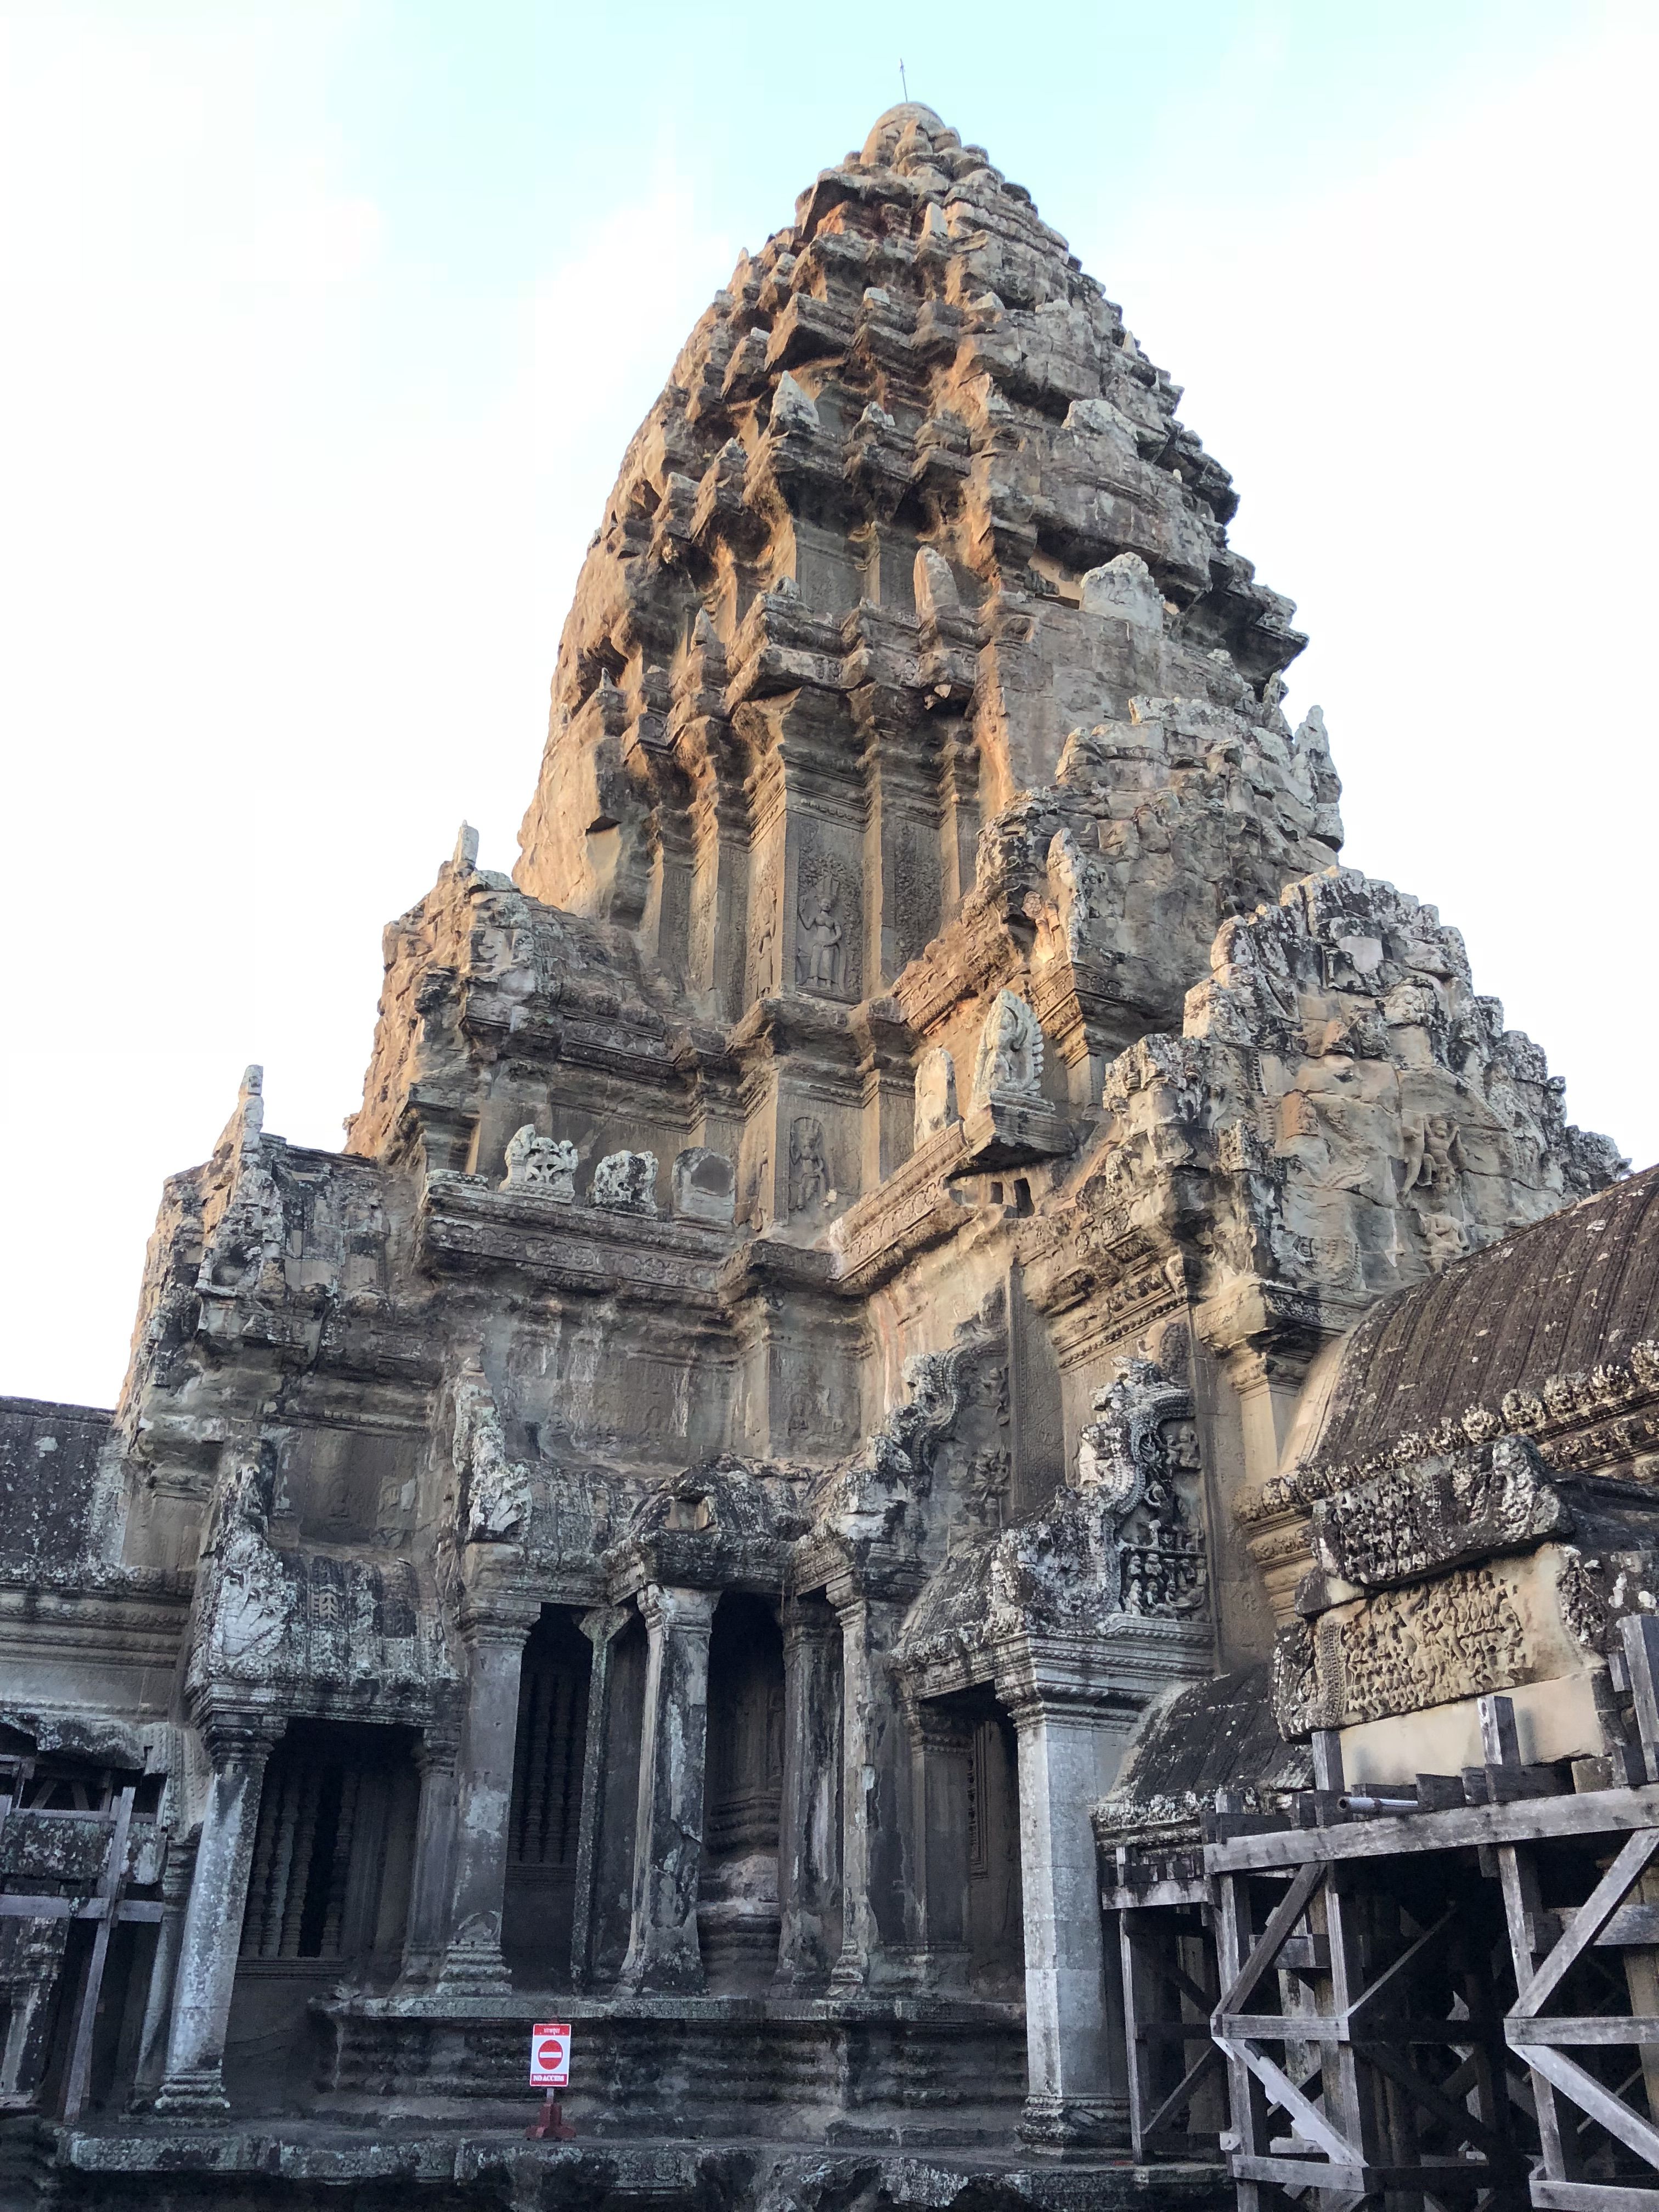 A tower at Angkor Wat. It is covered in complex carvings and at the bottom are square columns and doorways arrange in a strange and  complicated pattern.